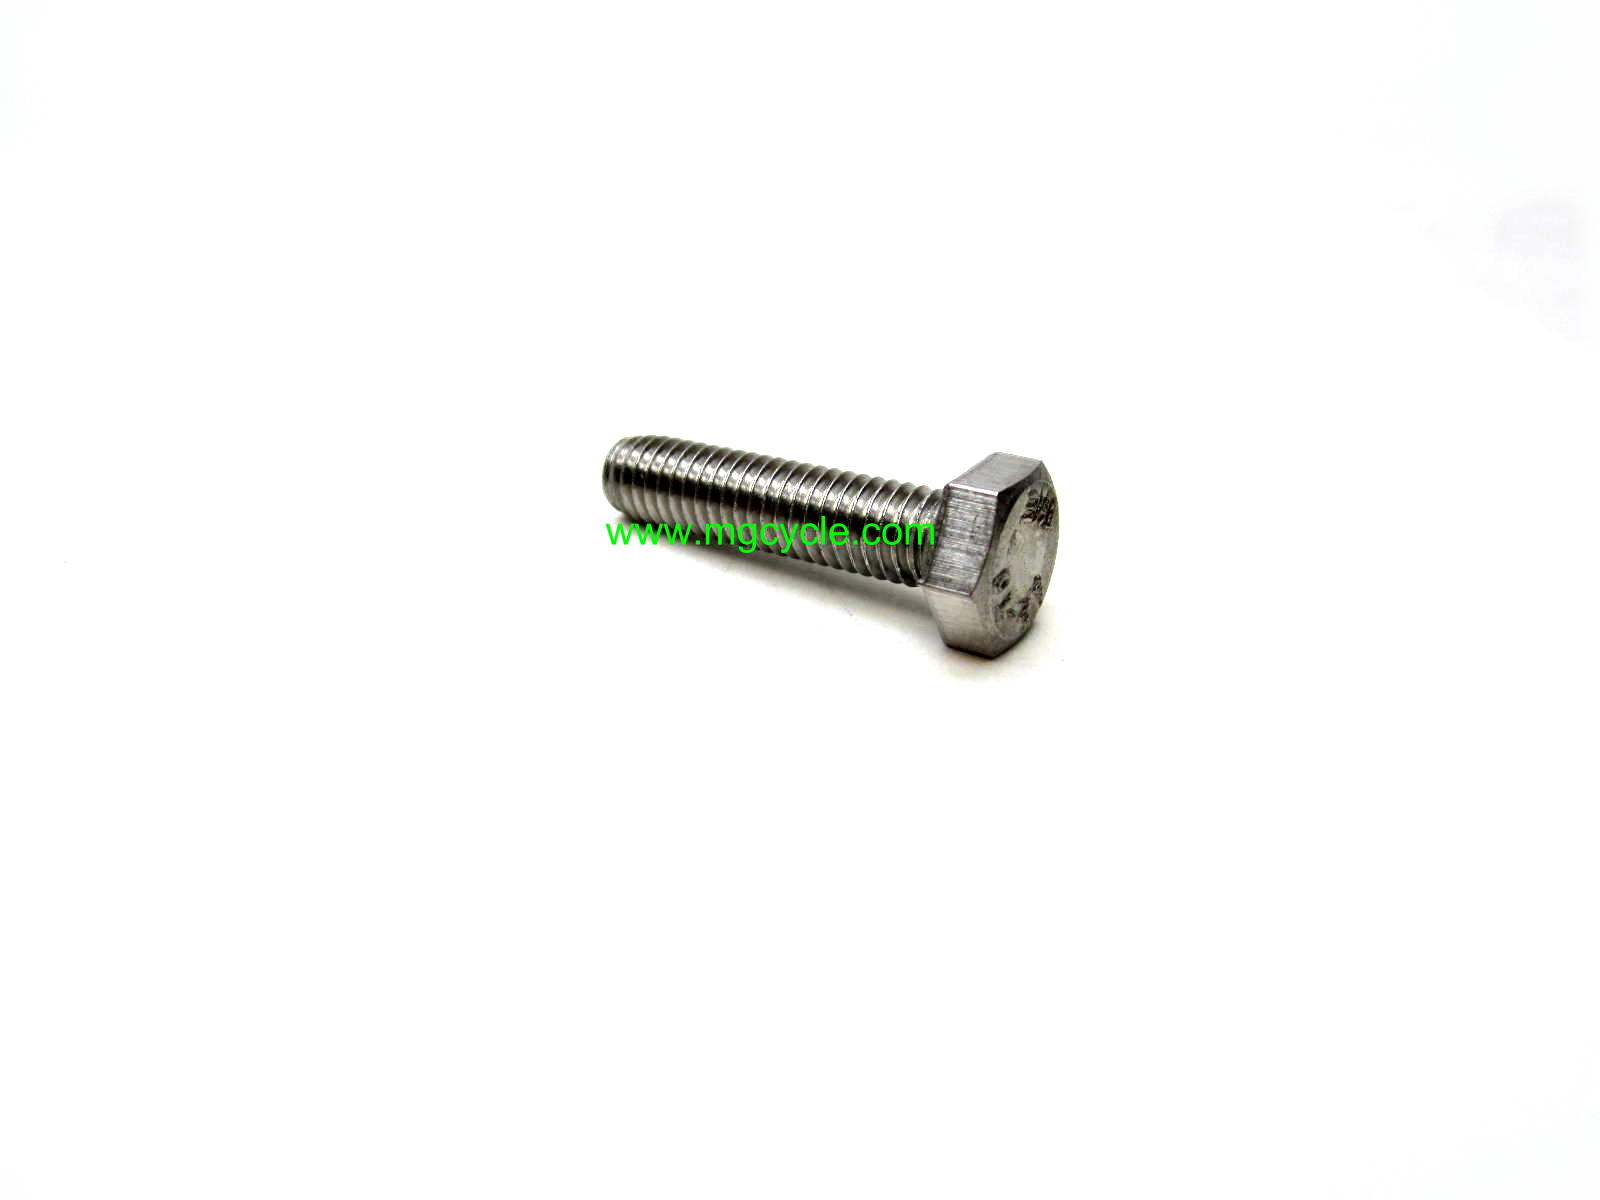 6mm hex head bolt stainless M6x1.0x25 - Click Image to Close